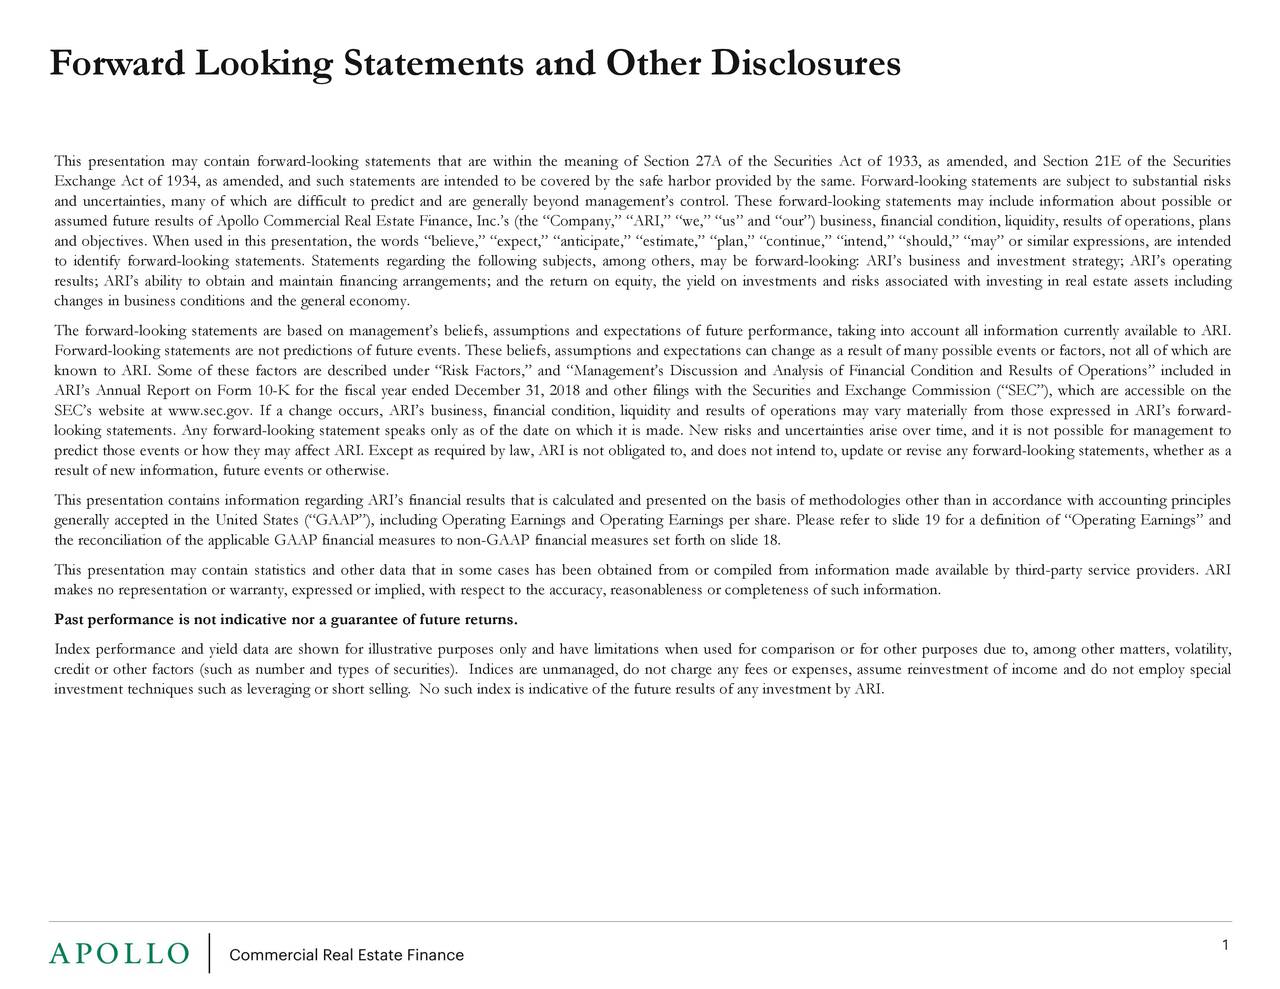 Forward Looking Statements and Other Disclosures